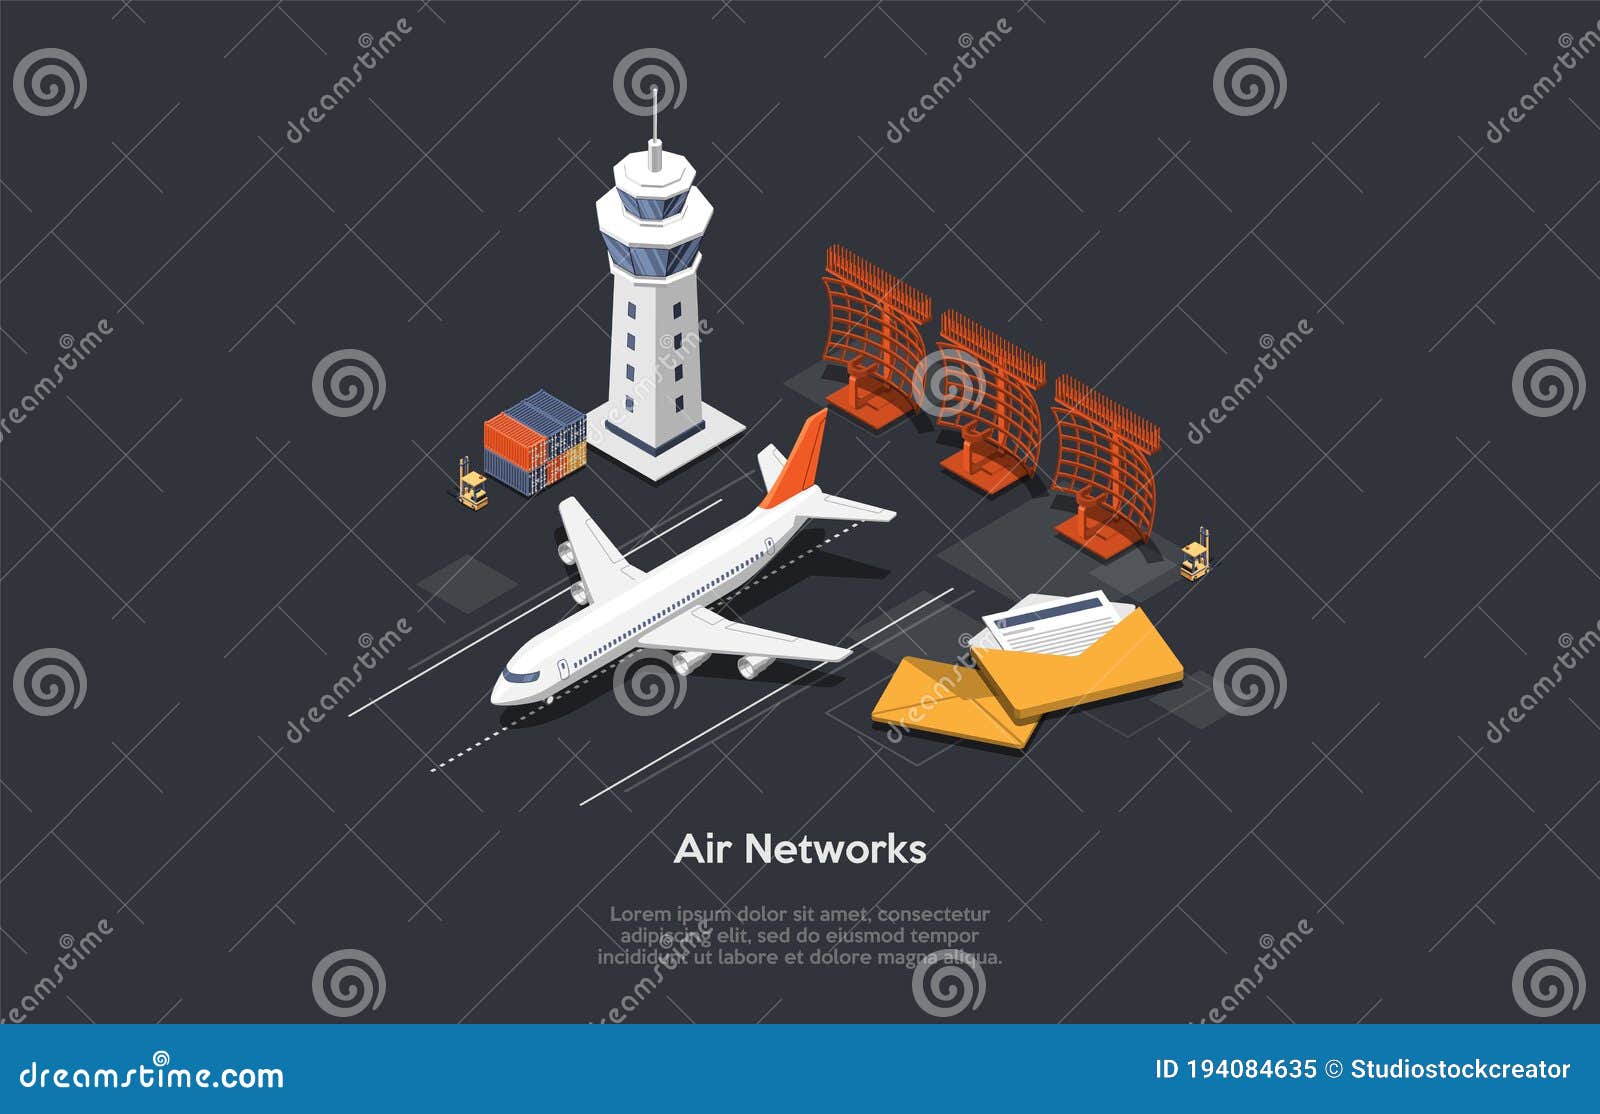 air network concept. set of airport control tower, airplane on runway, correspondance letters, forklift and containers